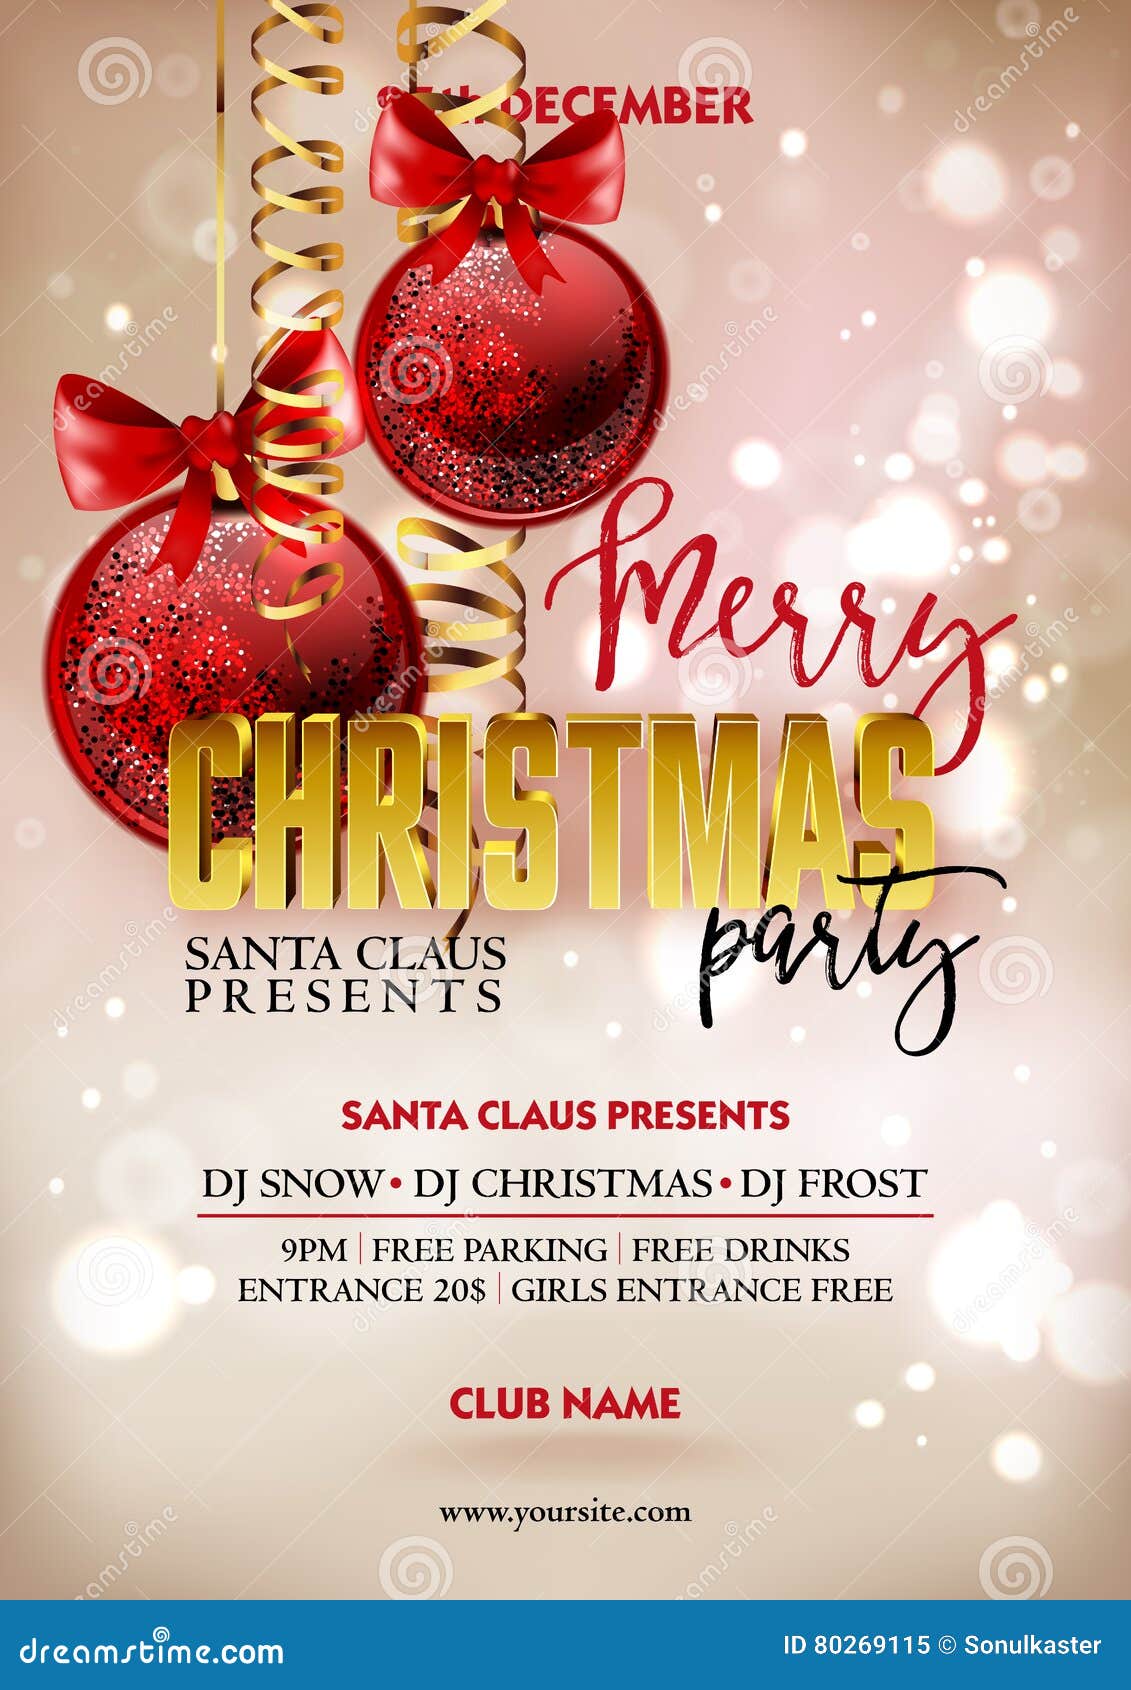 Merry Christmas Party Poster Design Template With Decoration Balls. Stock Vector  Image: 80269115